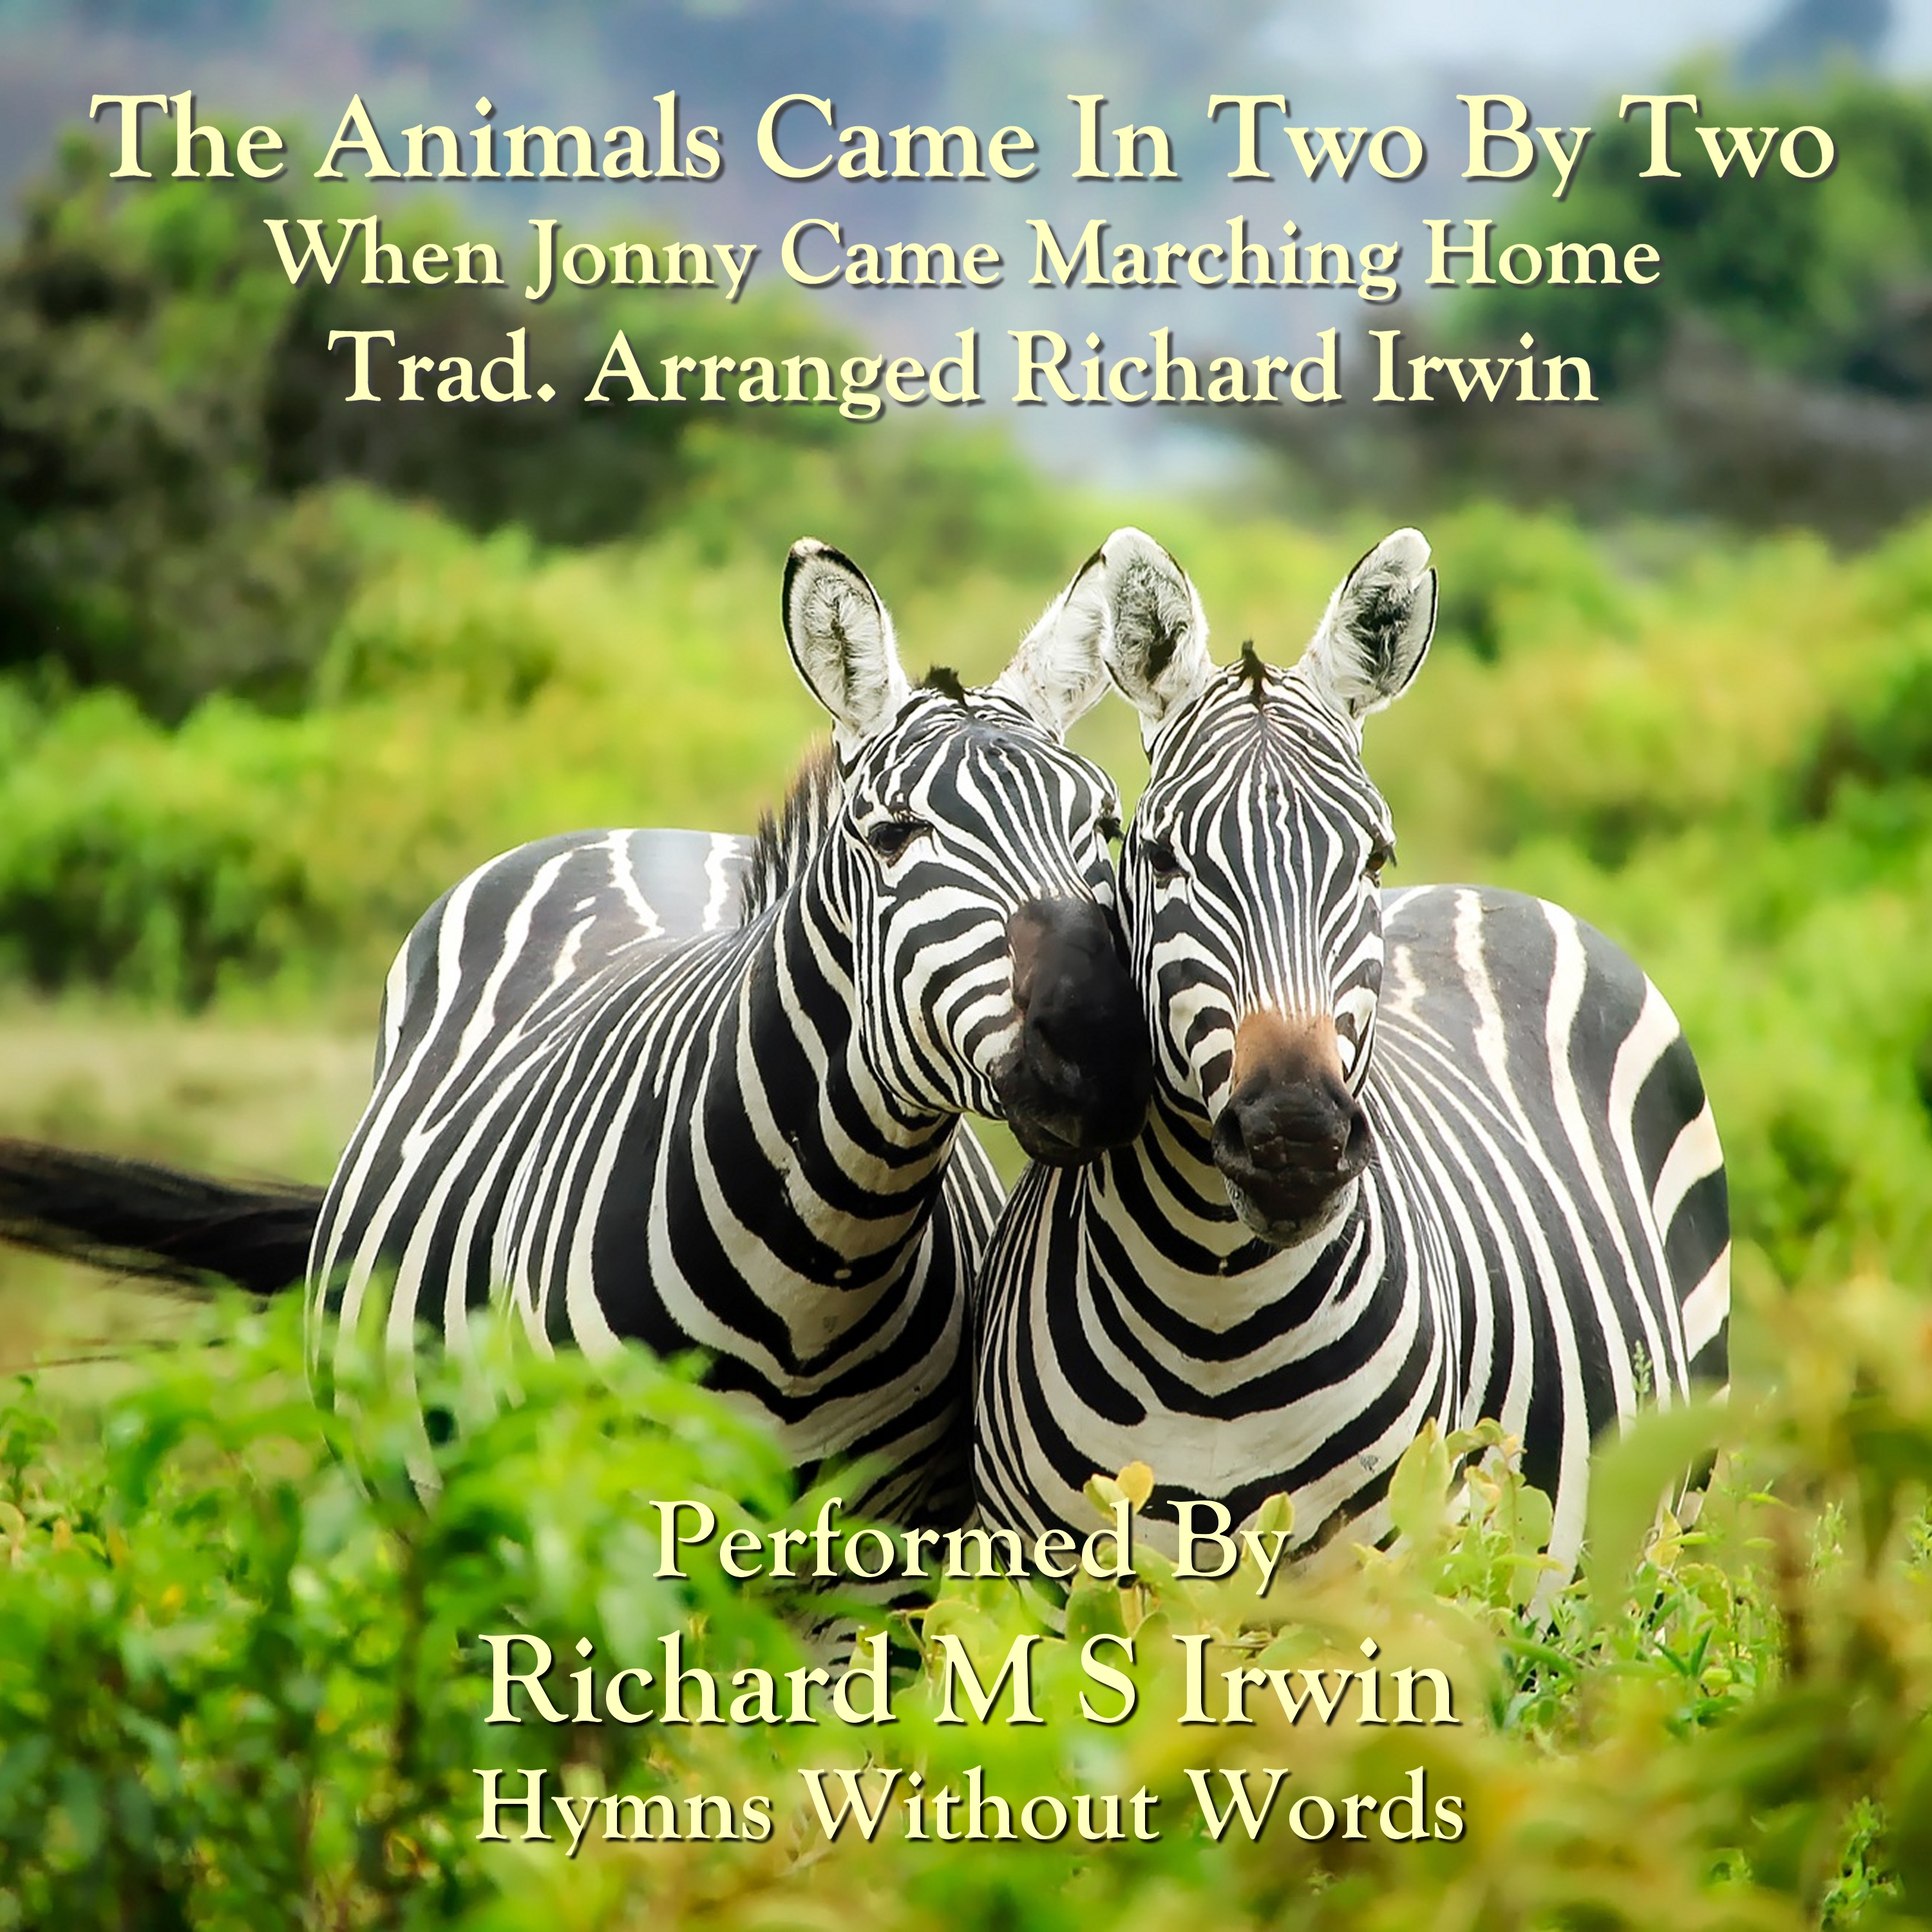 The Animals Went In Two By Two (When Johnny Came Marching Home, Small Band,  6 Verses) - Hymns Without Words